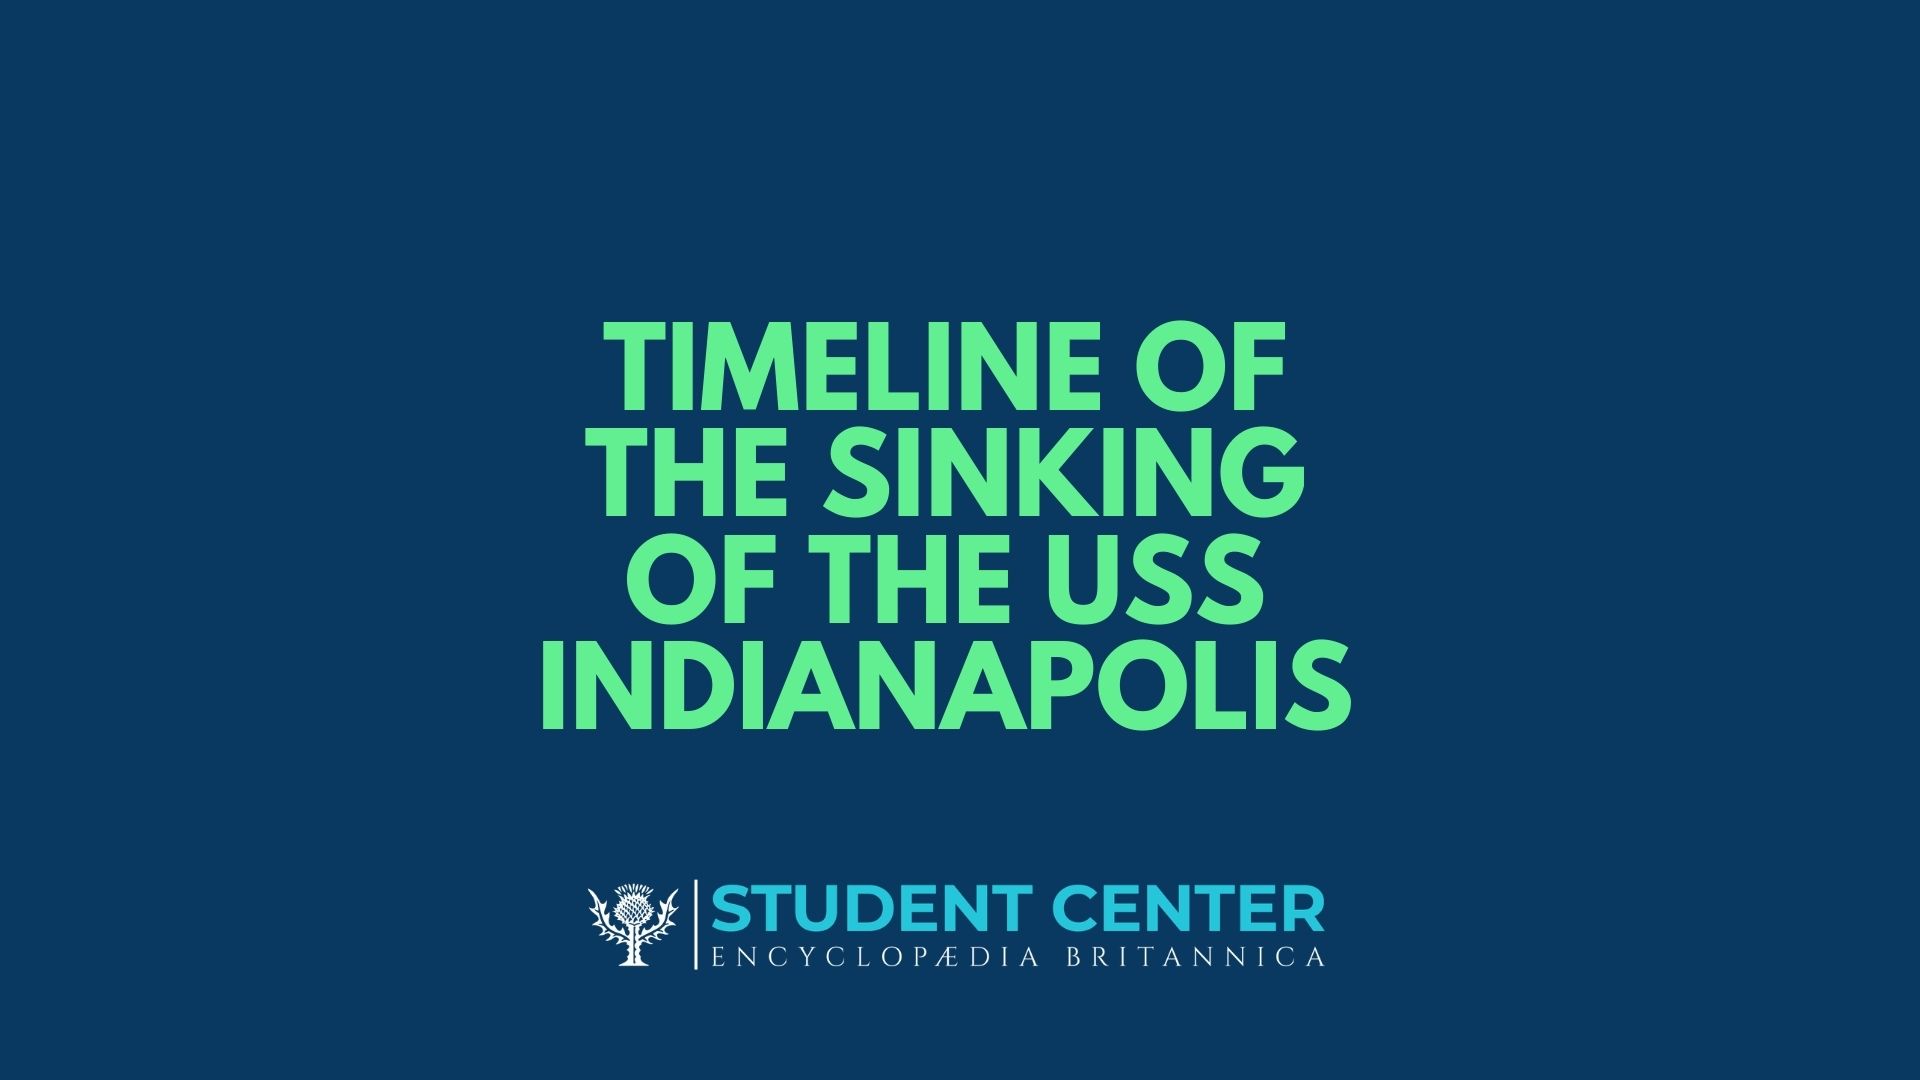 Timeline - The Sinking of the USS Indianapolis